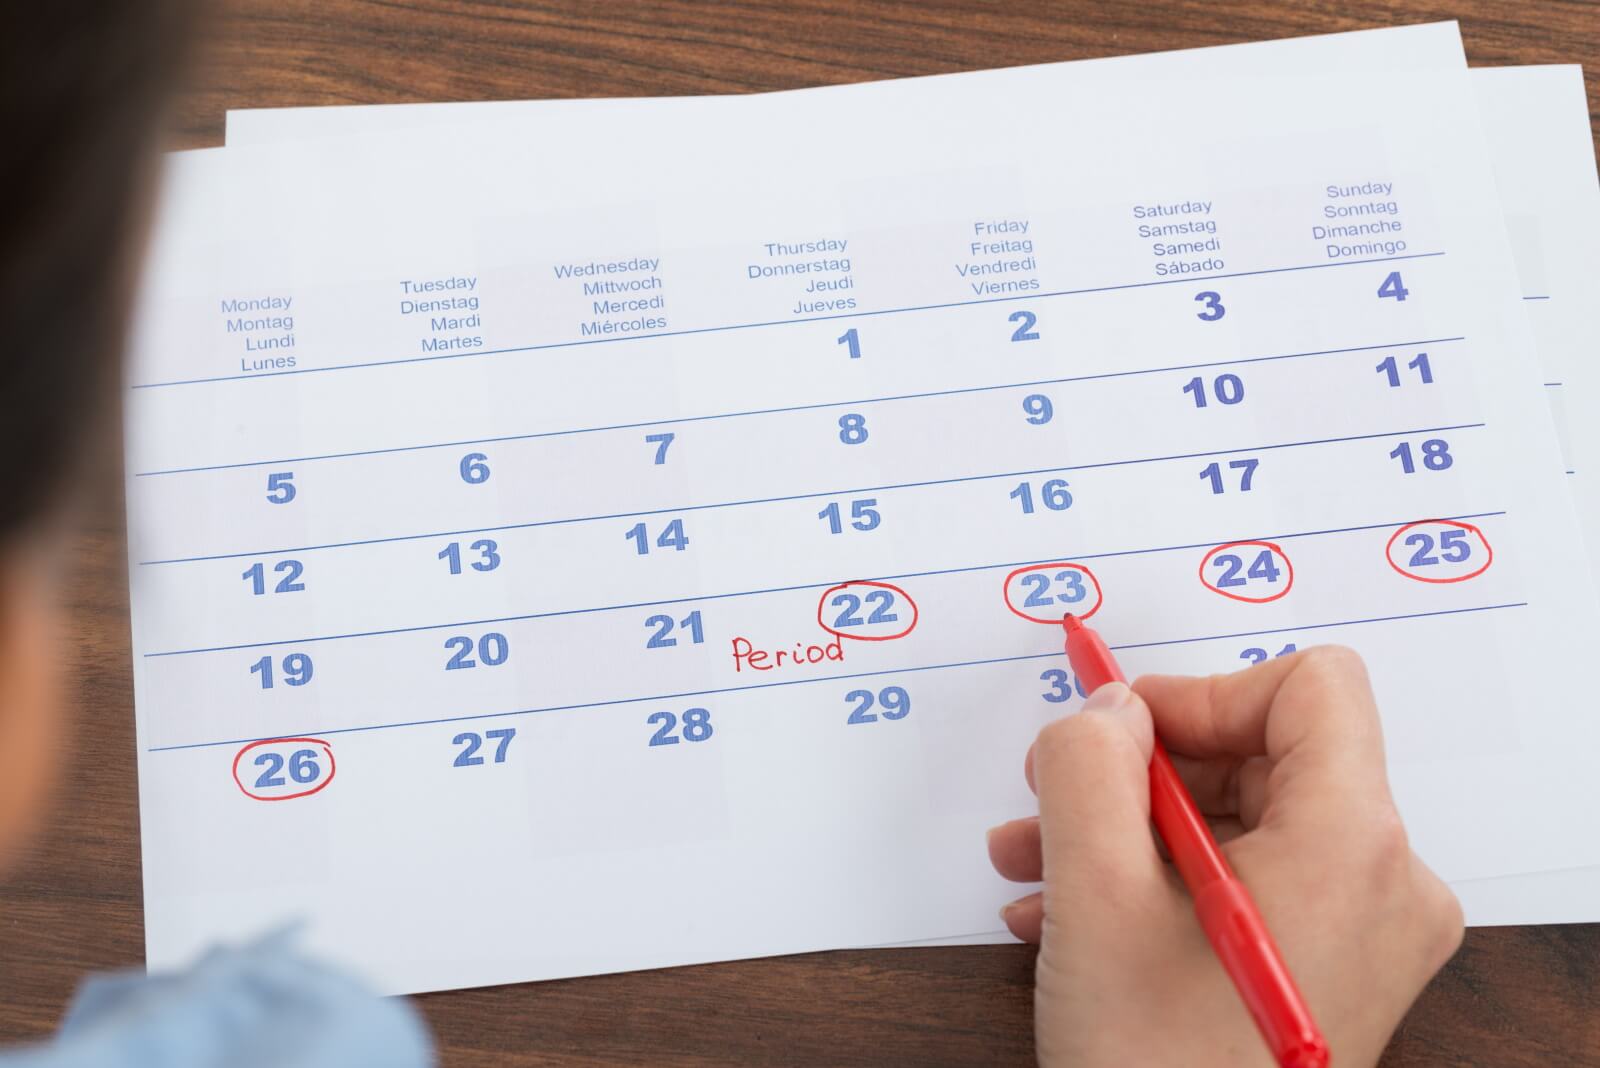 Calendar with days circled and the word 'Period'